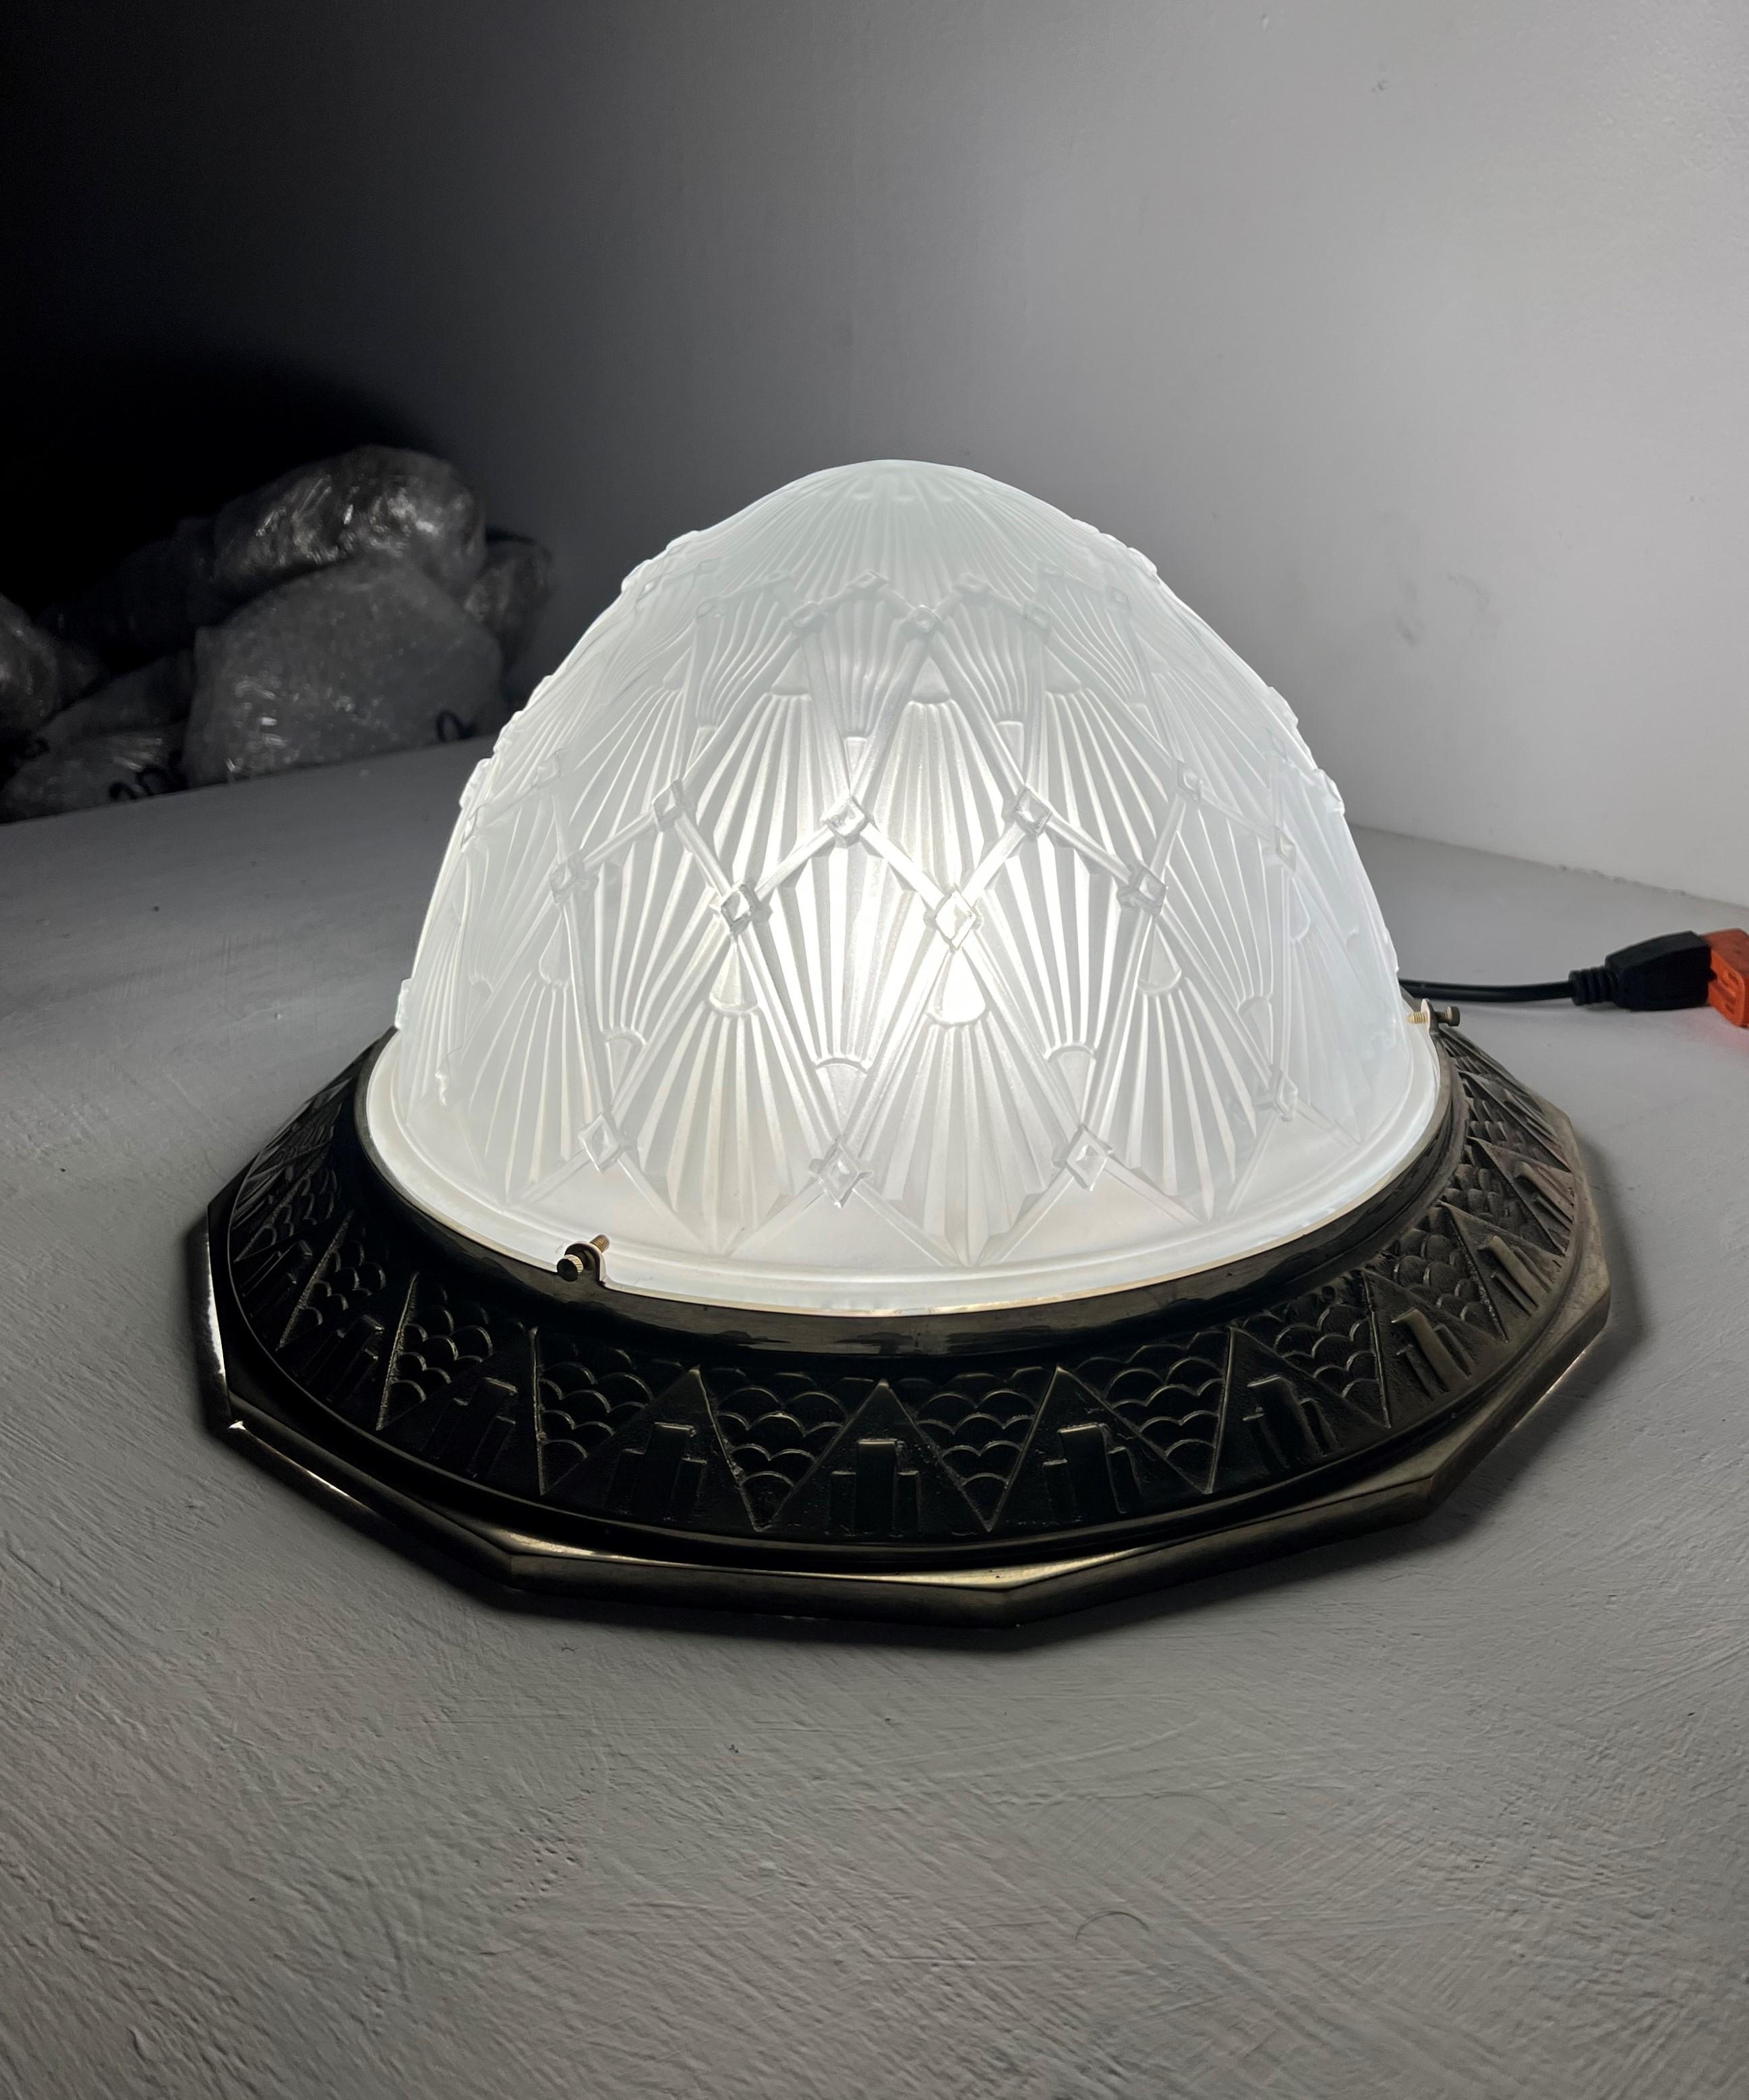 Large Art Deco Dome Flush Mount, Frosted Glas and Nickeled Bronze, France 1930s For Sale 4